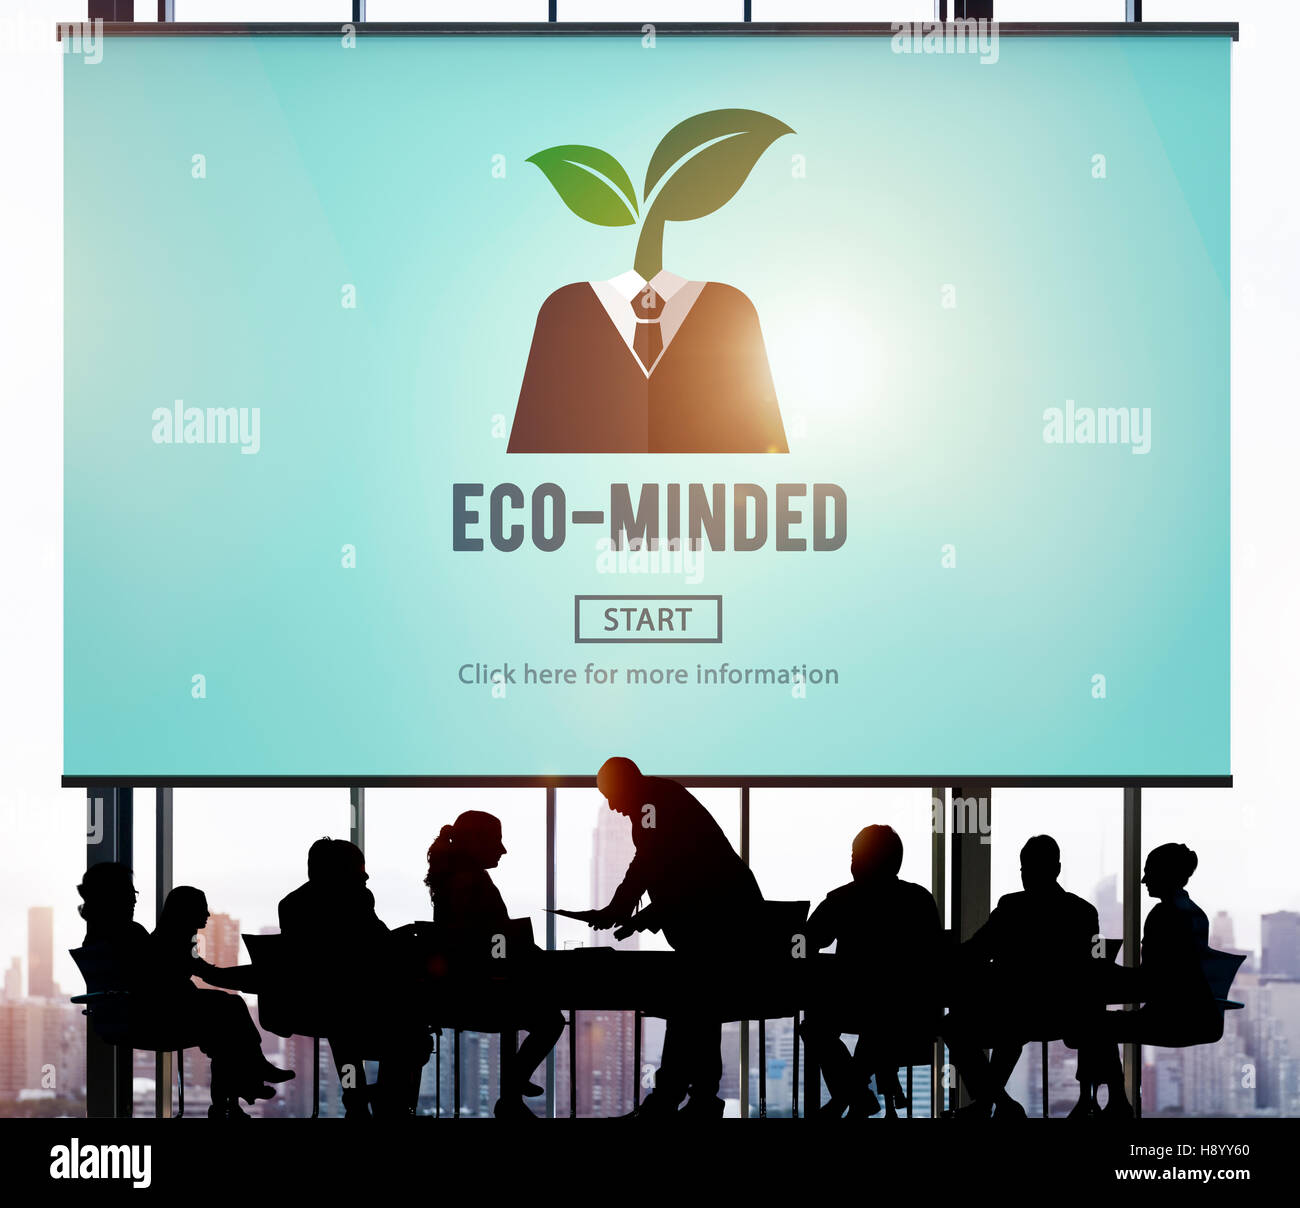 Eco-Minded Energy Environmental Sustainable Concept Stock Photo